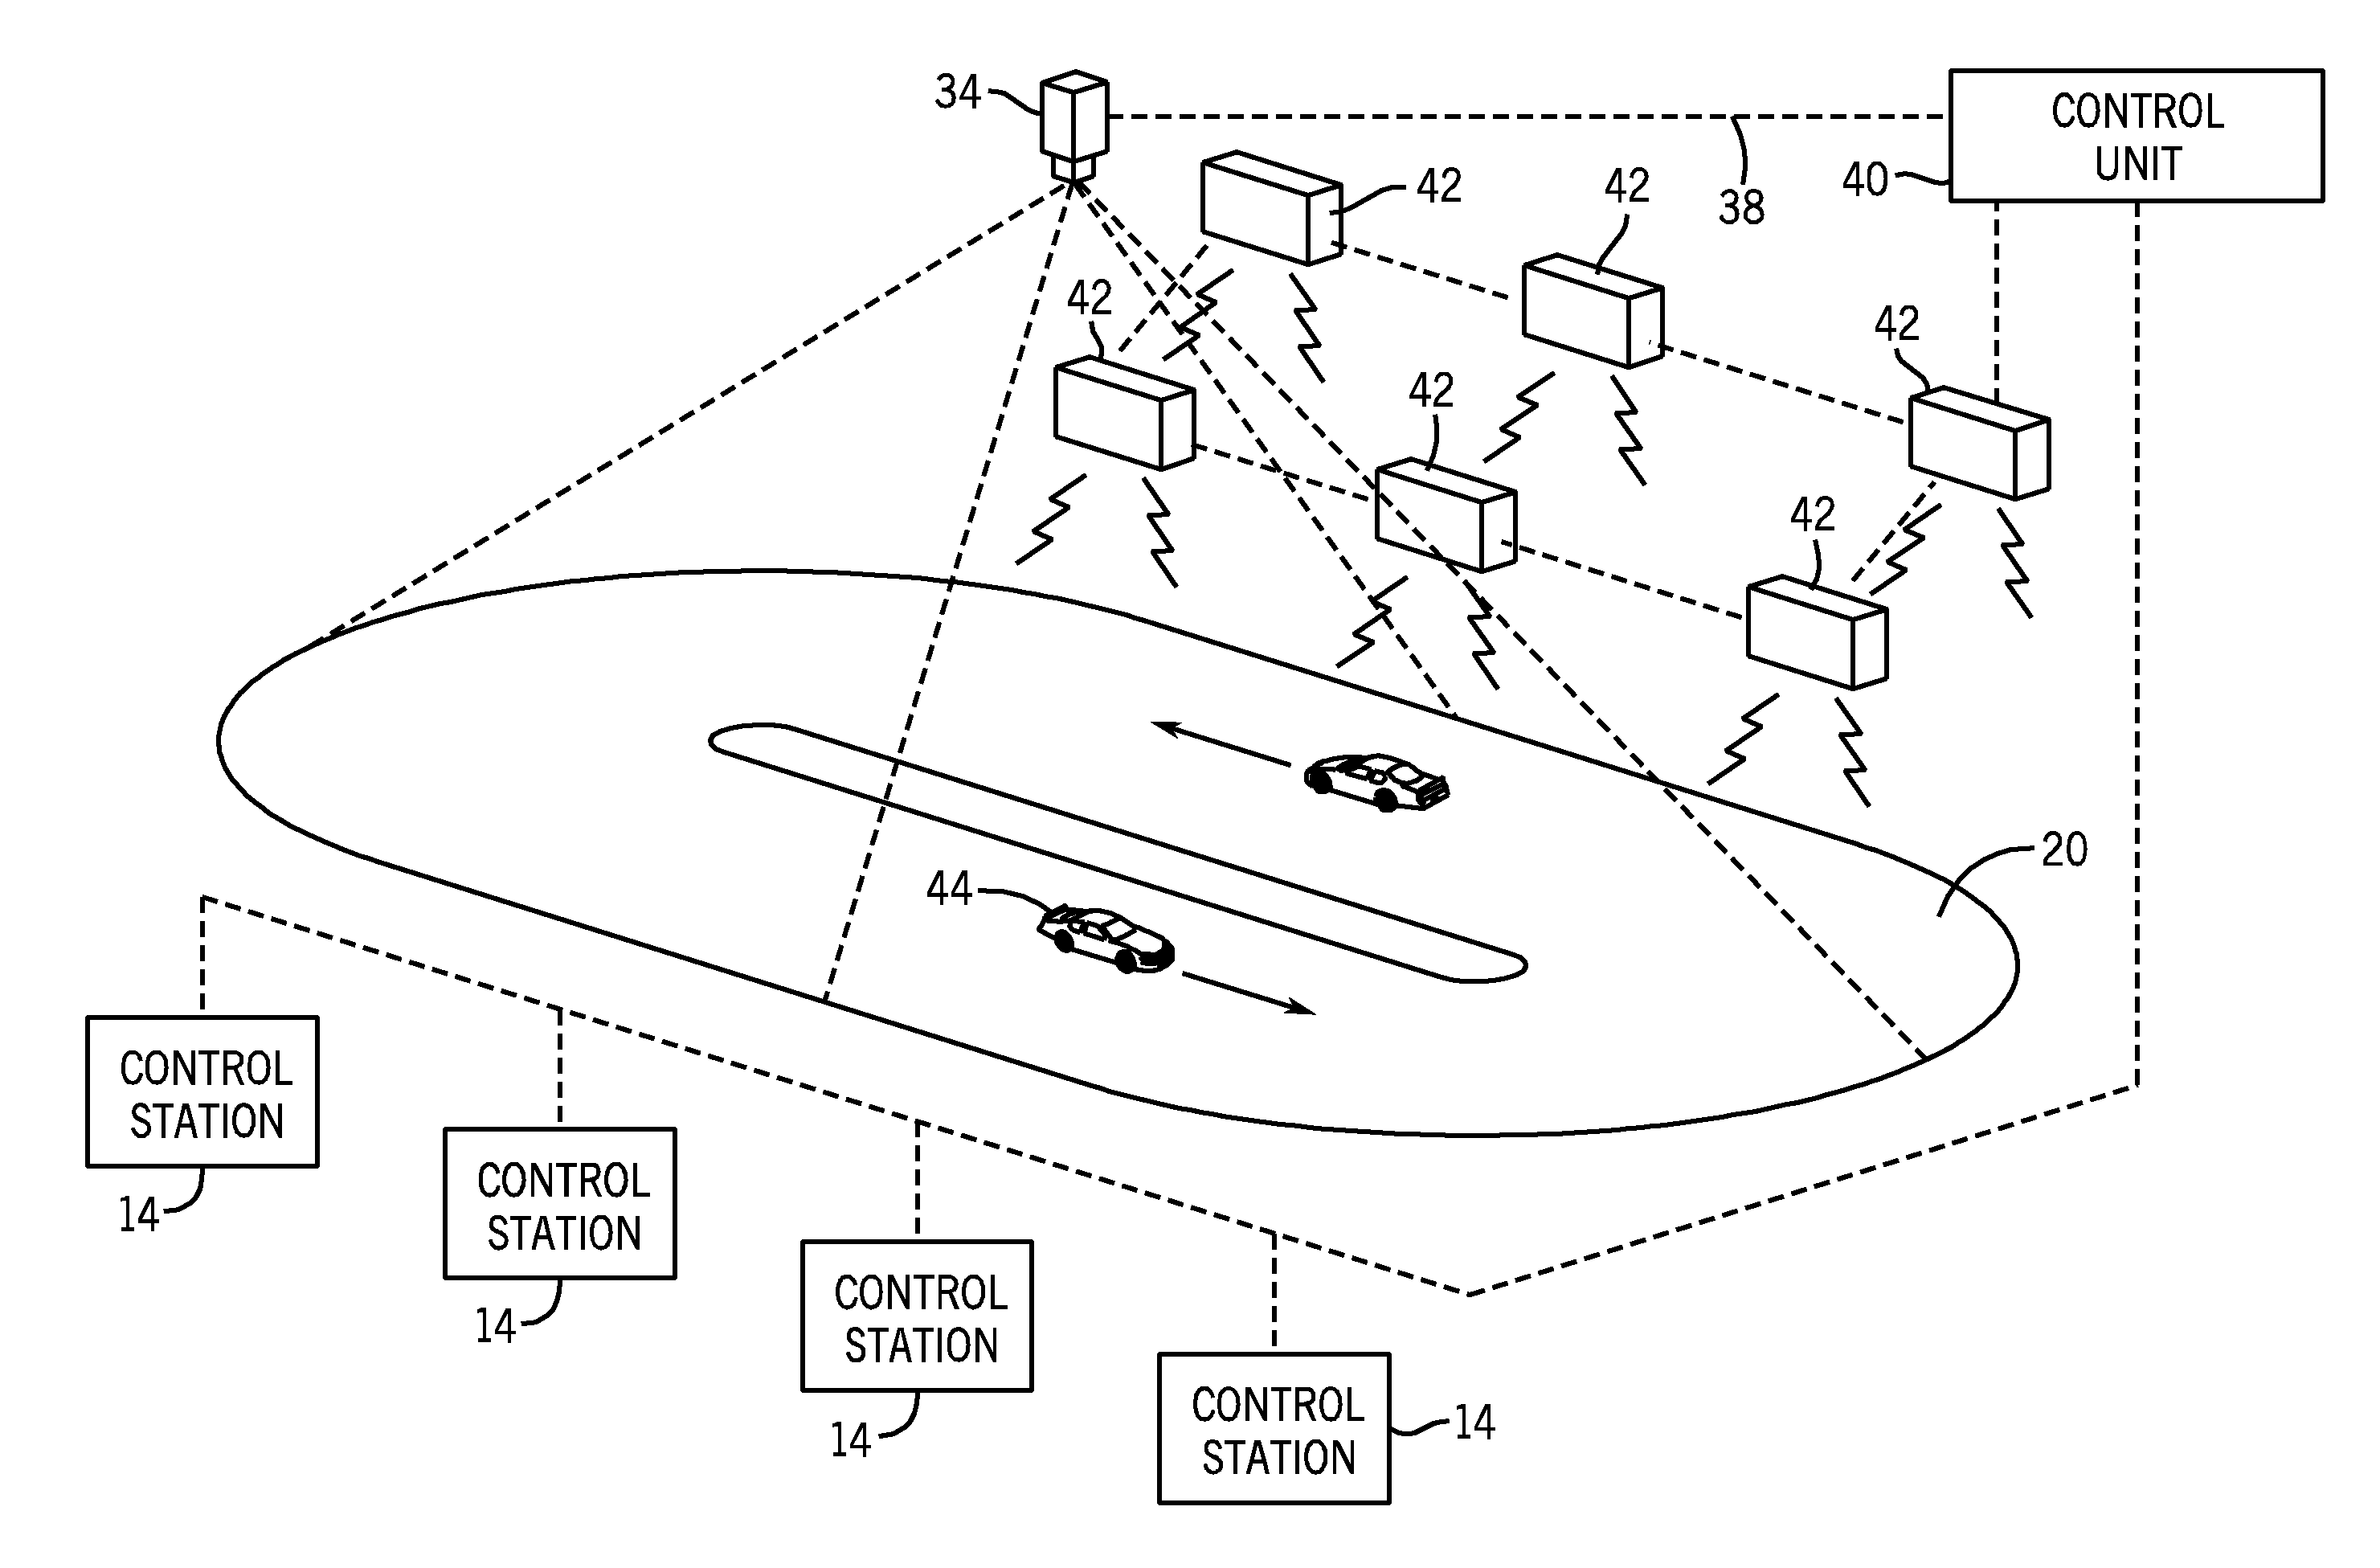 System and method for controlling movement of a plurality of game objects along a playfield